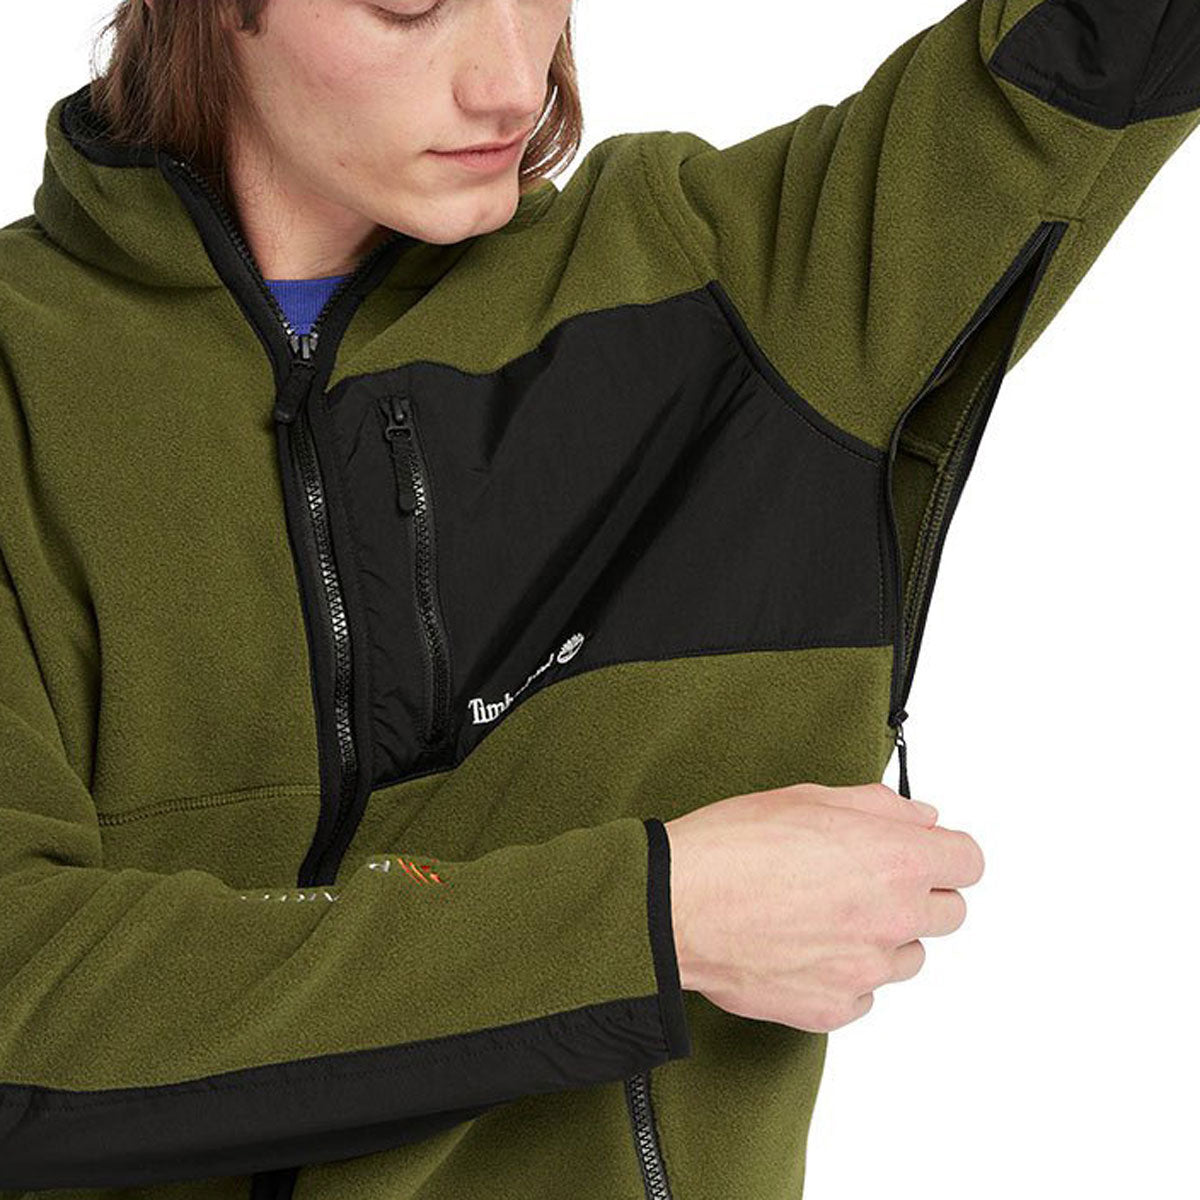 Timberland Outdoor Archive Re-issue Jacket - Dark Olive image 3